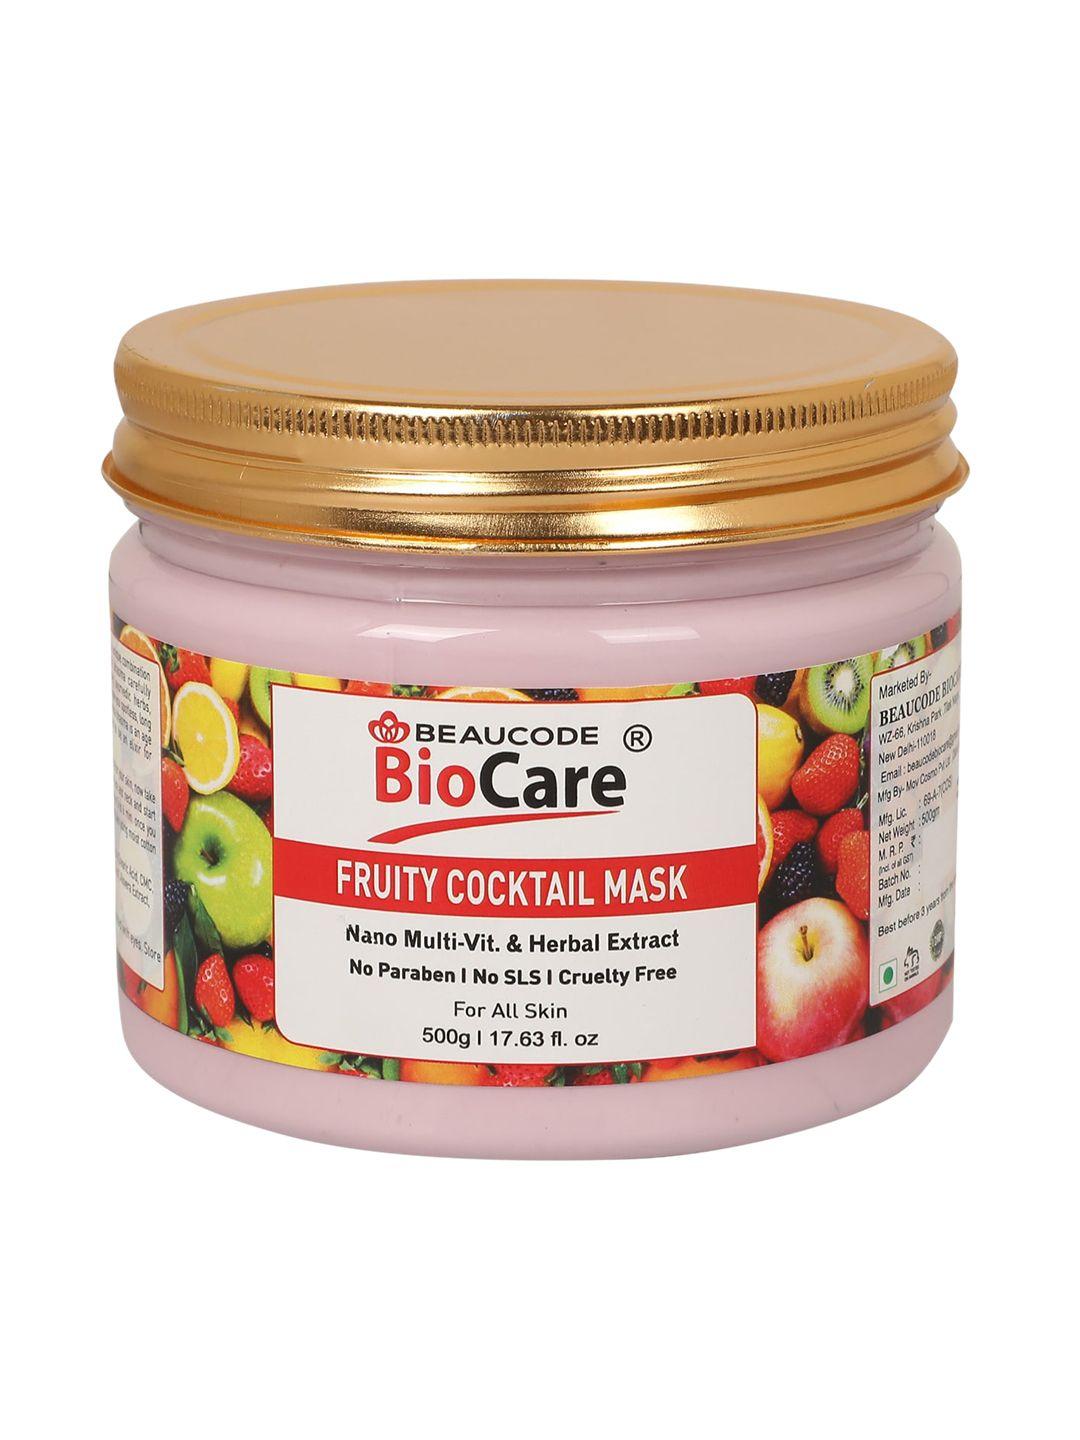 beaucode biocare fruity cocktail face & body mask - 500g